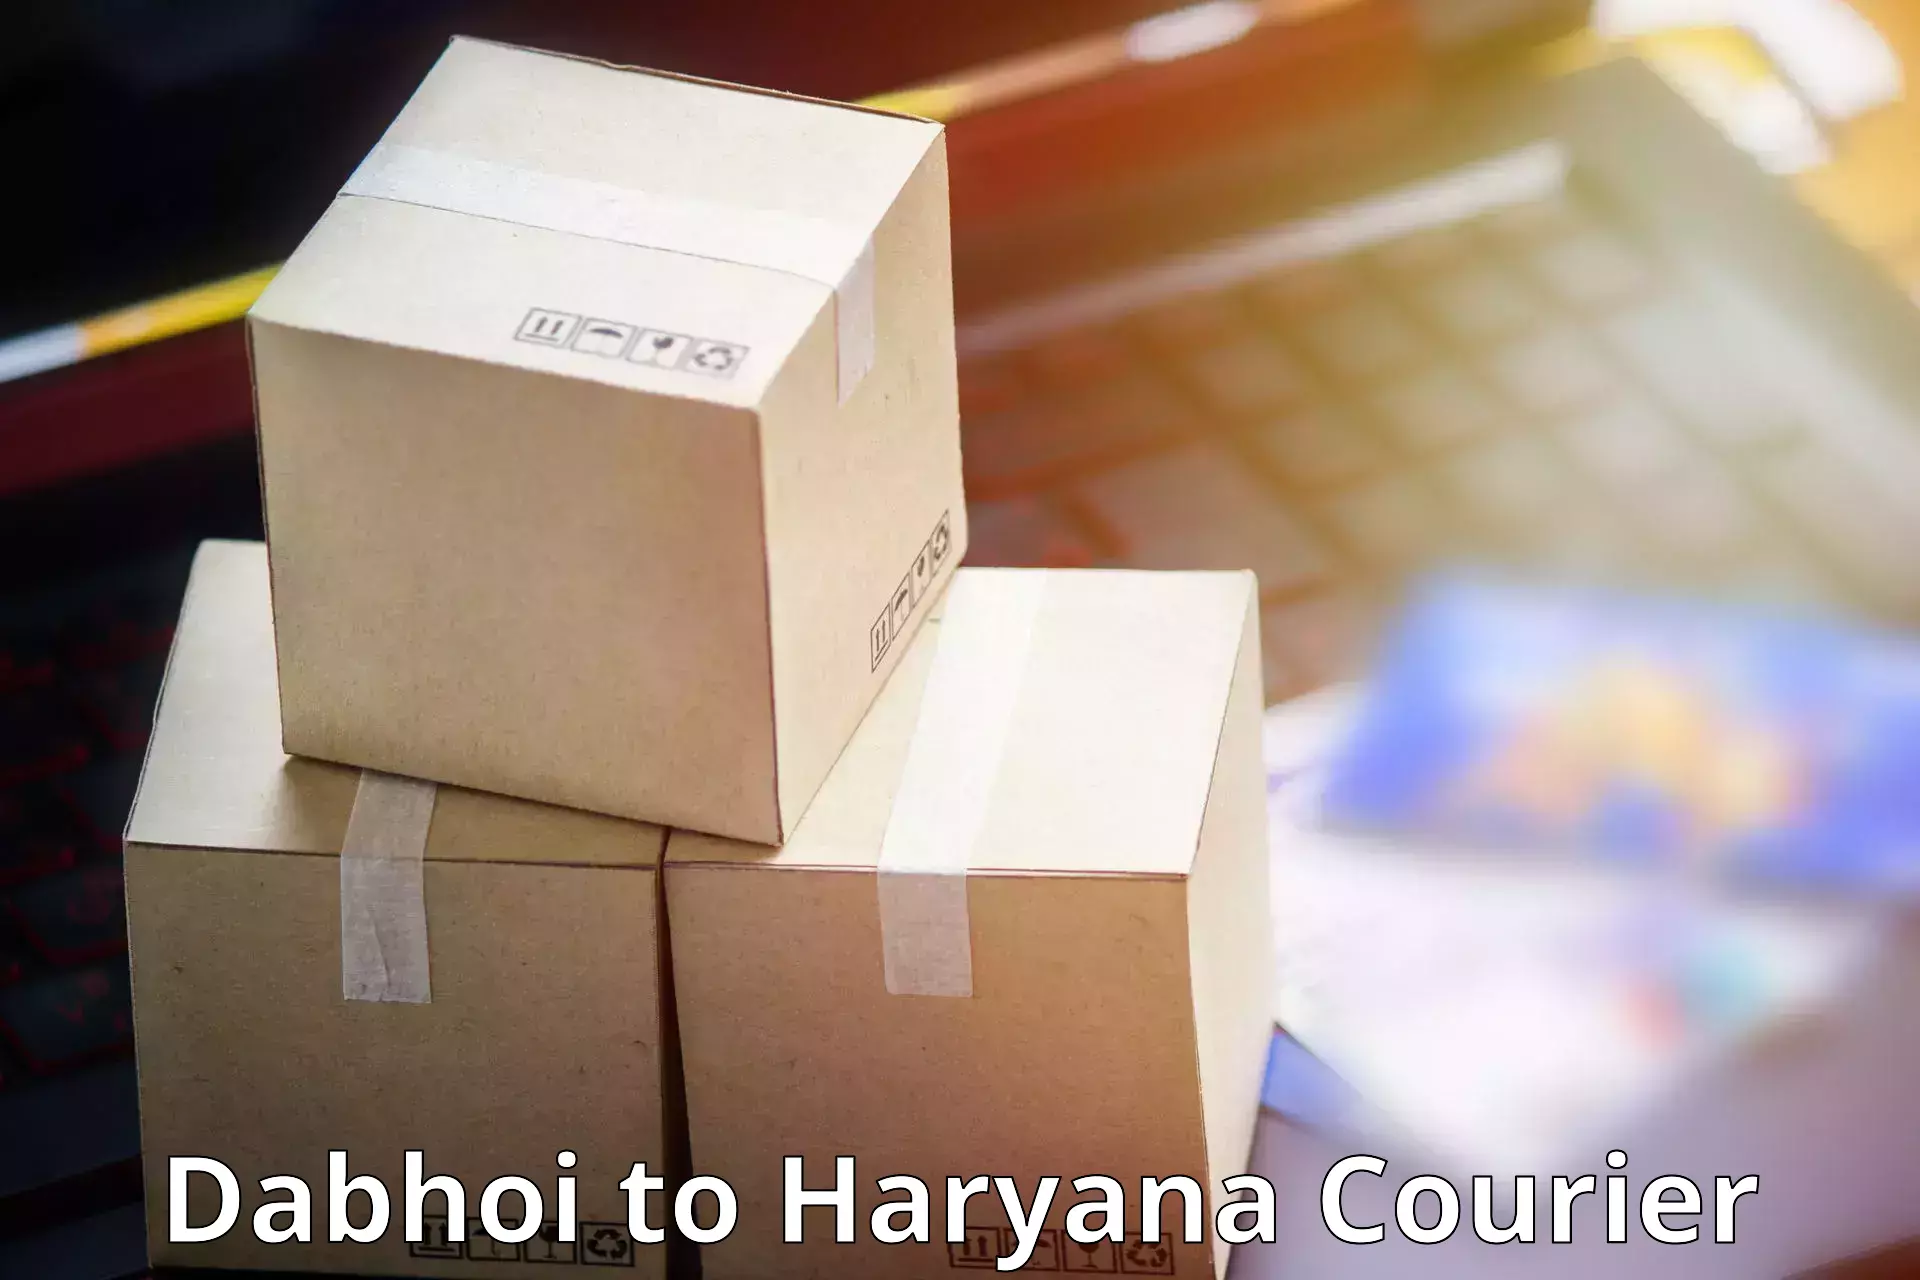 Air courier services in Dabhoi to Faridabad